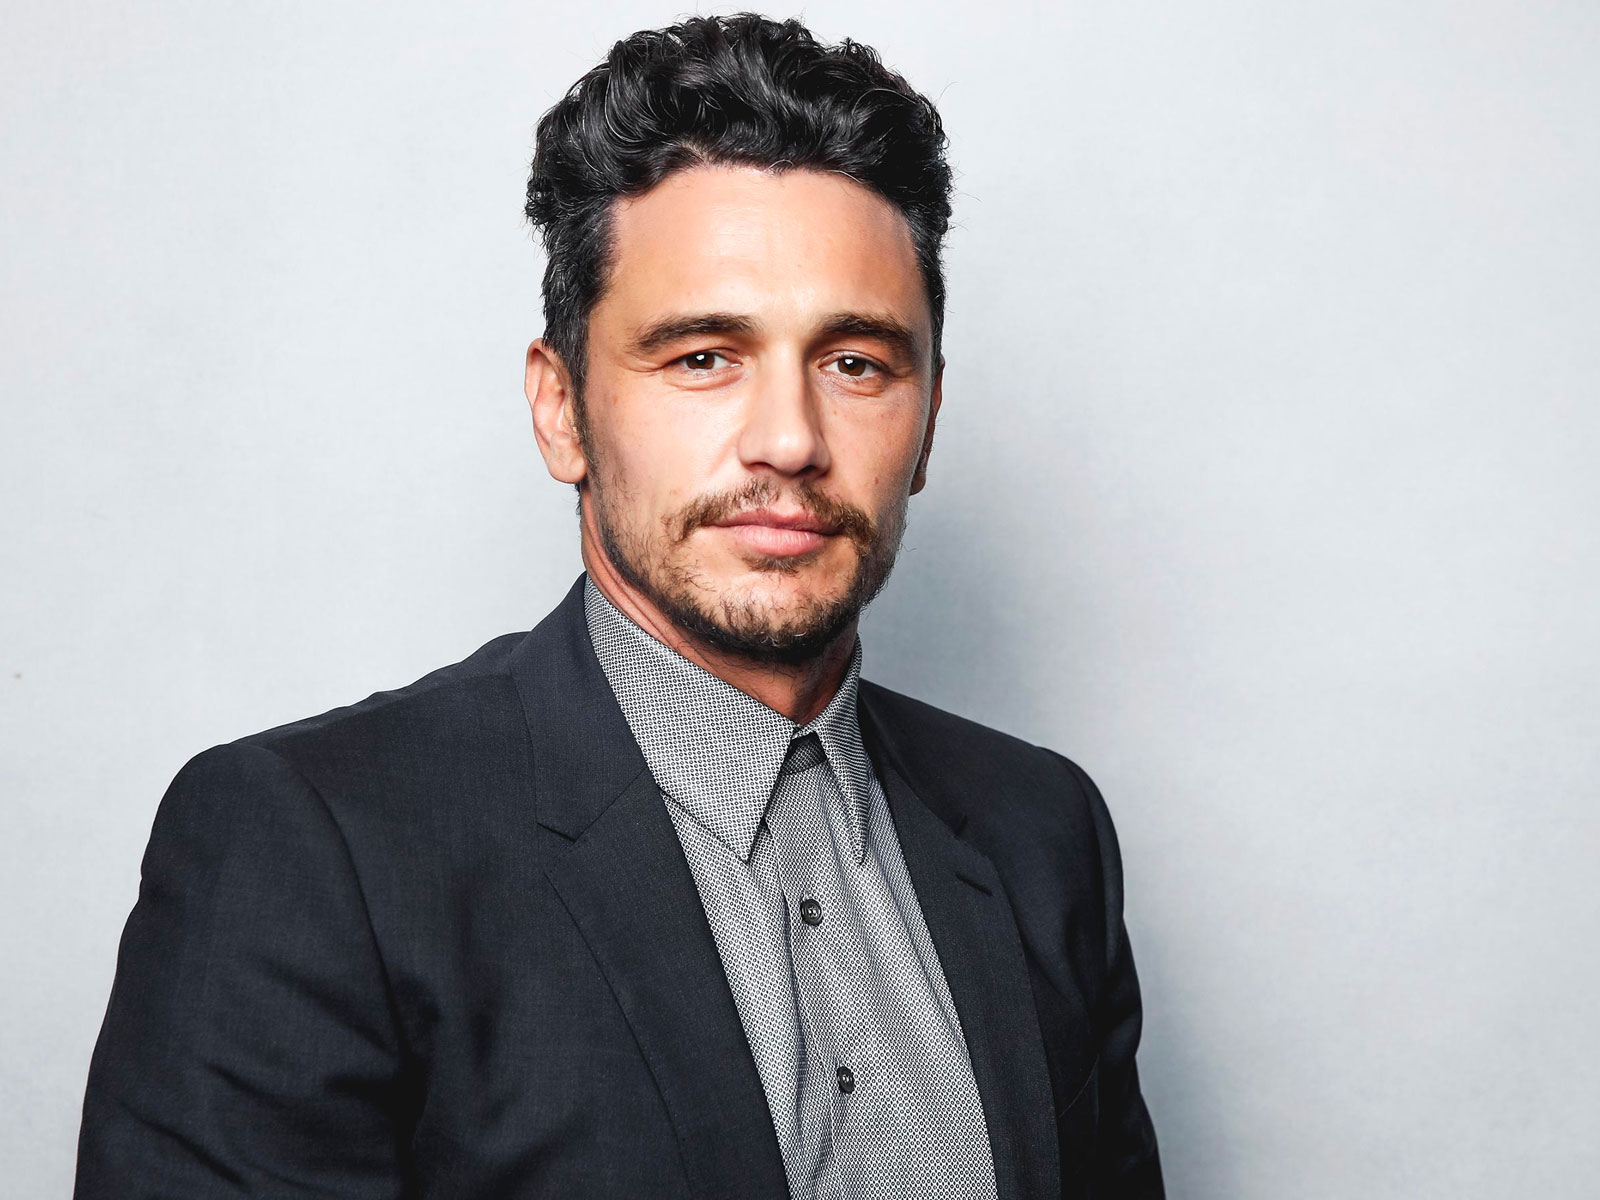 Choose Between These Actors and Characters to Date and We’ll Find Out How Old You Are Inside James Franco